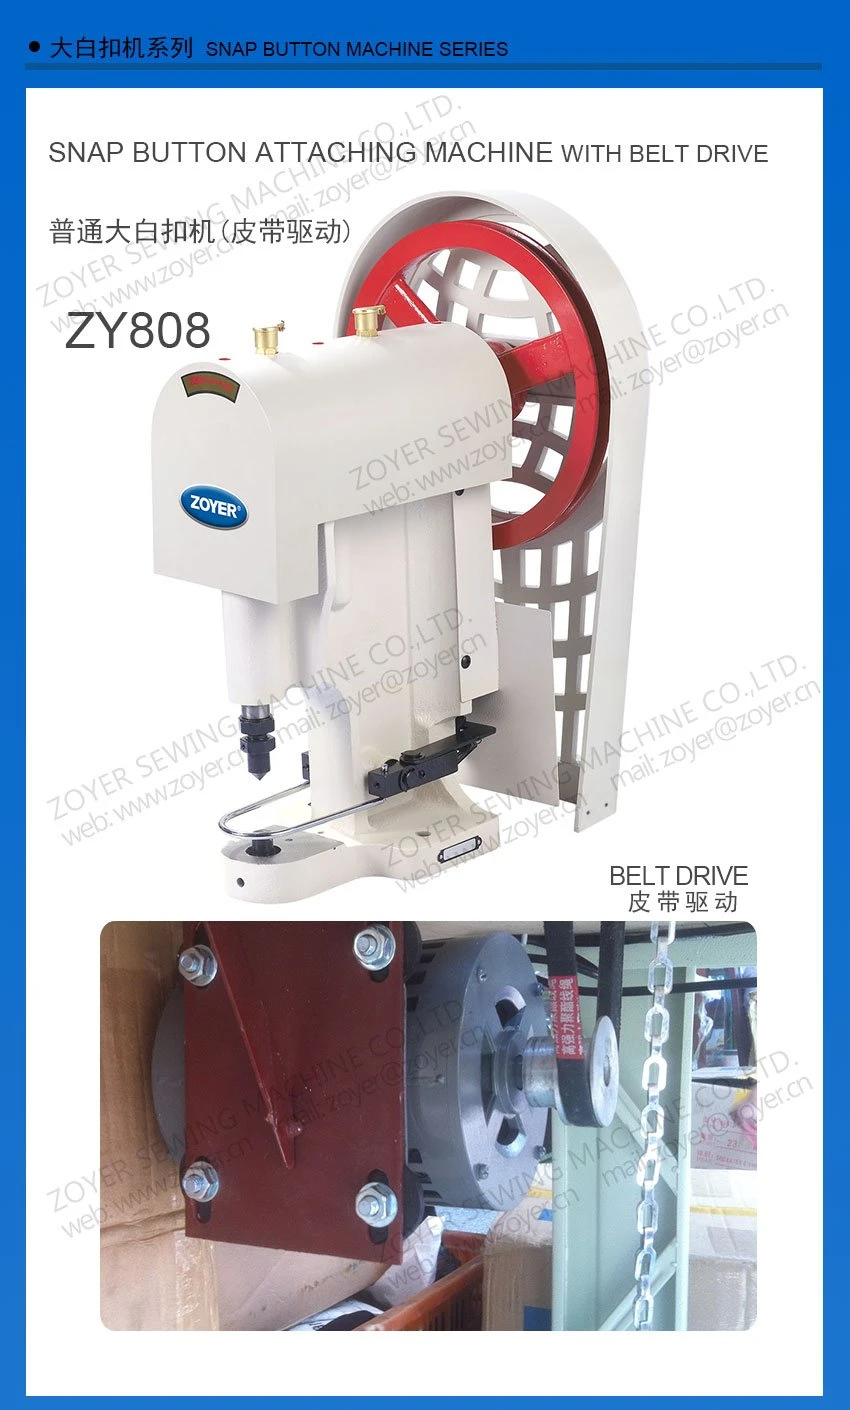 Zy808 Snap Button Attaching Machine with Belt Drive